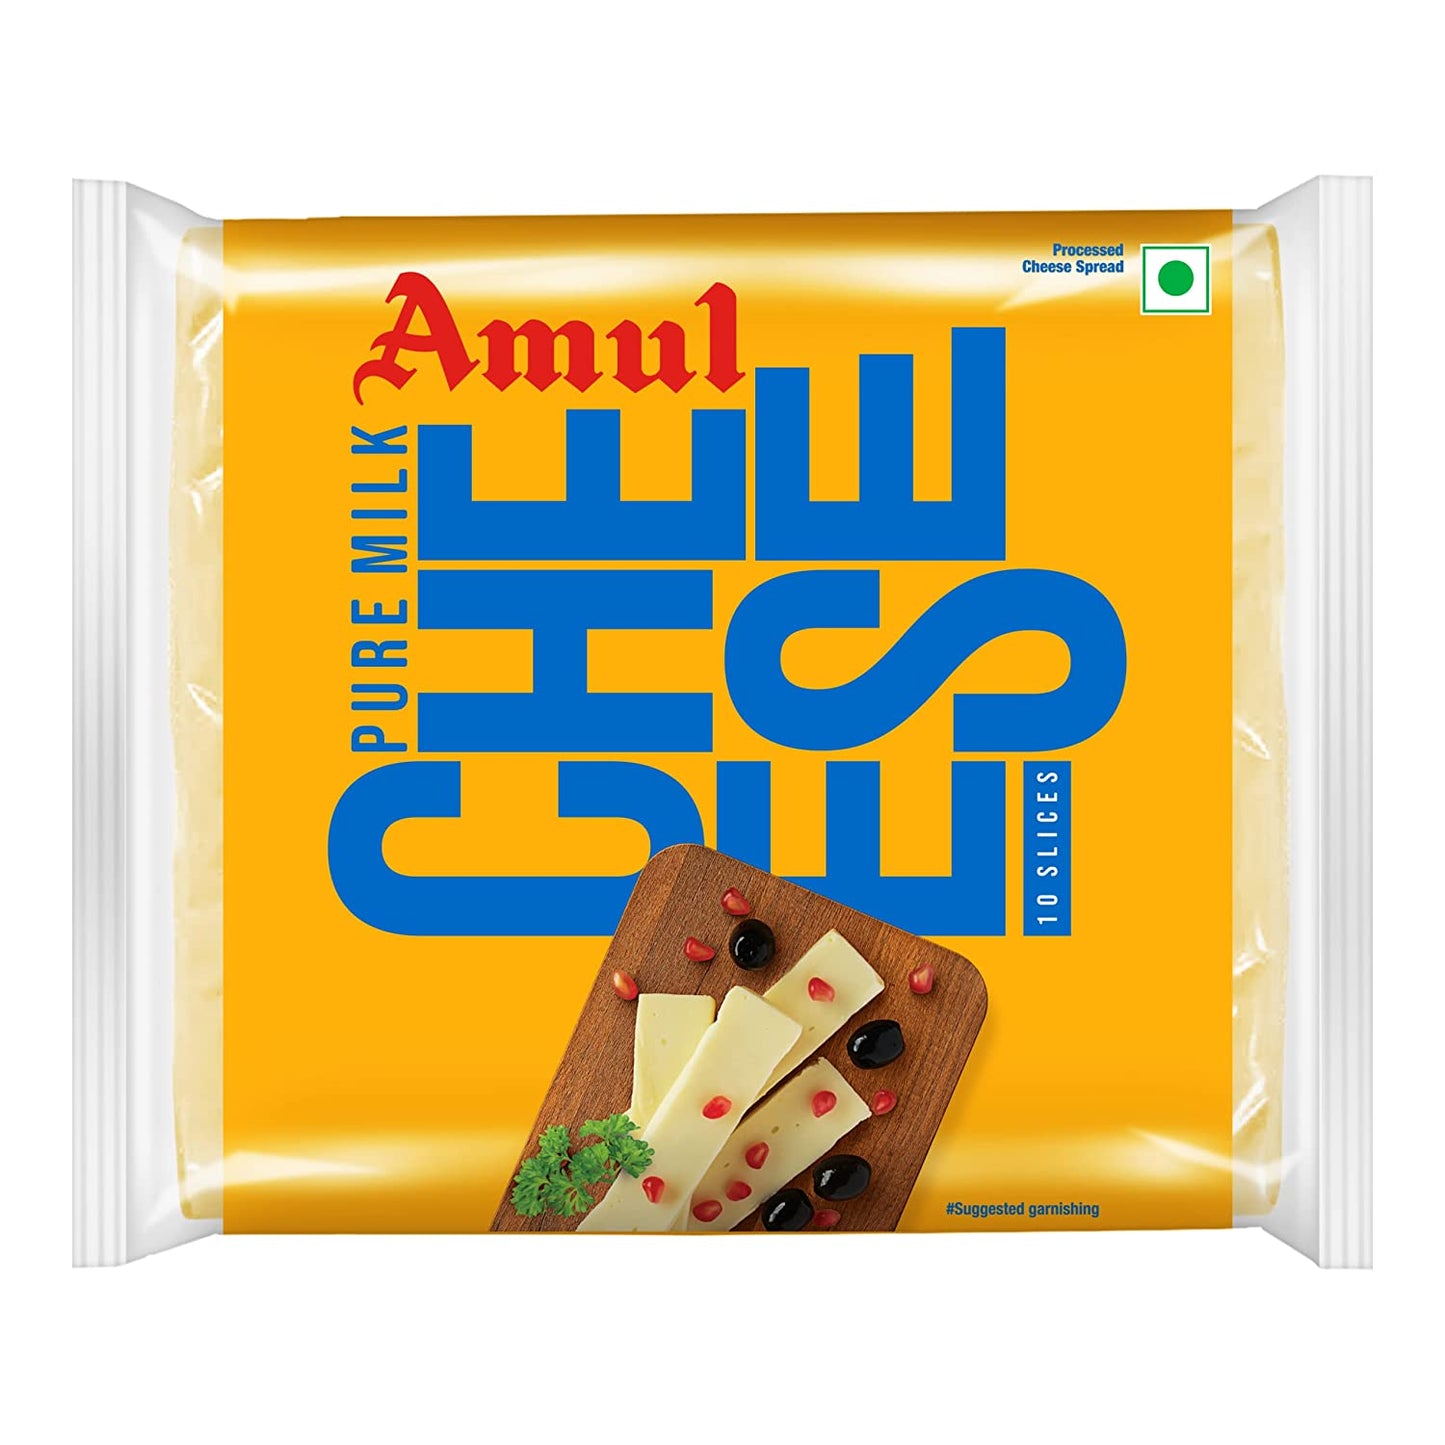 Amul Cheese Slices, 200g (10 Slices)